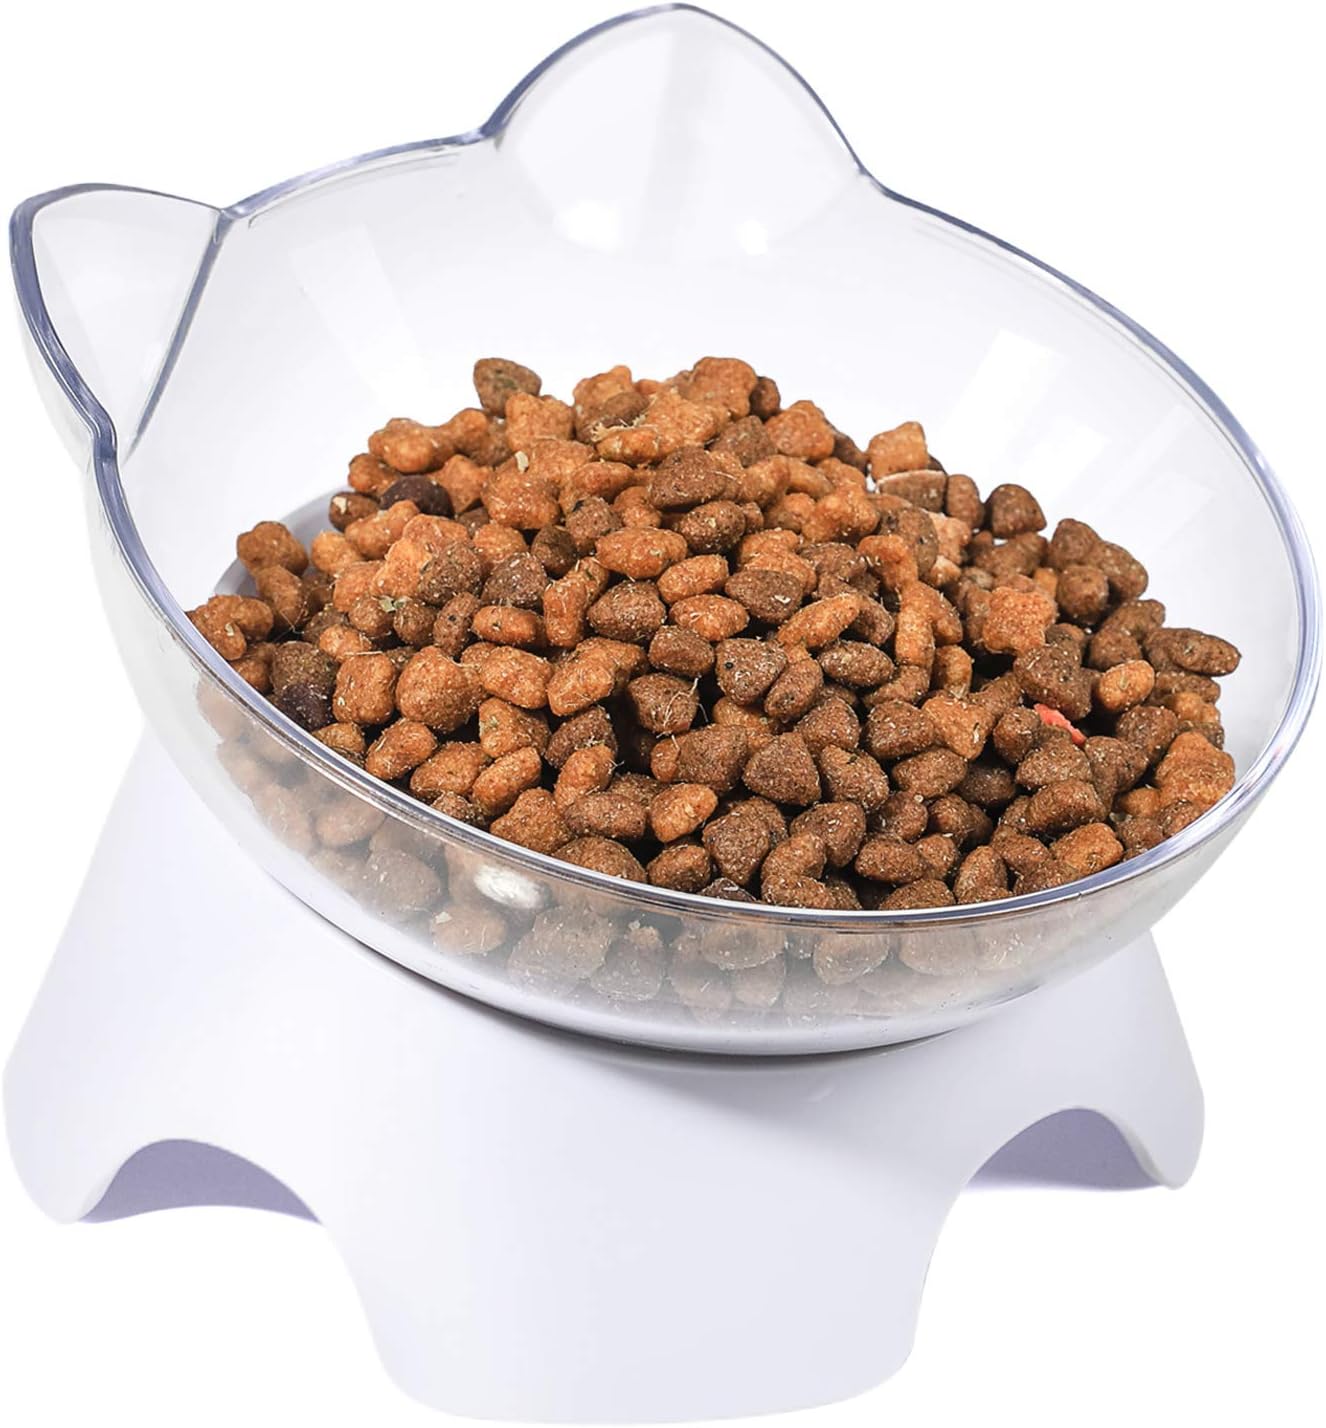 MILIFUN Anti Spill Tilted Cat Food Bowls, Whisker Fatigue Elevated Bowls Set for Cat and Puppy, Cat Bowl Holds About 1 Cup of Pet Food